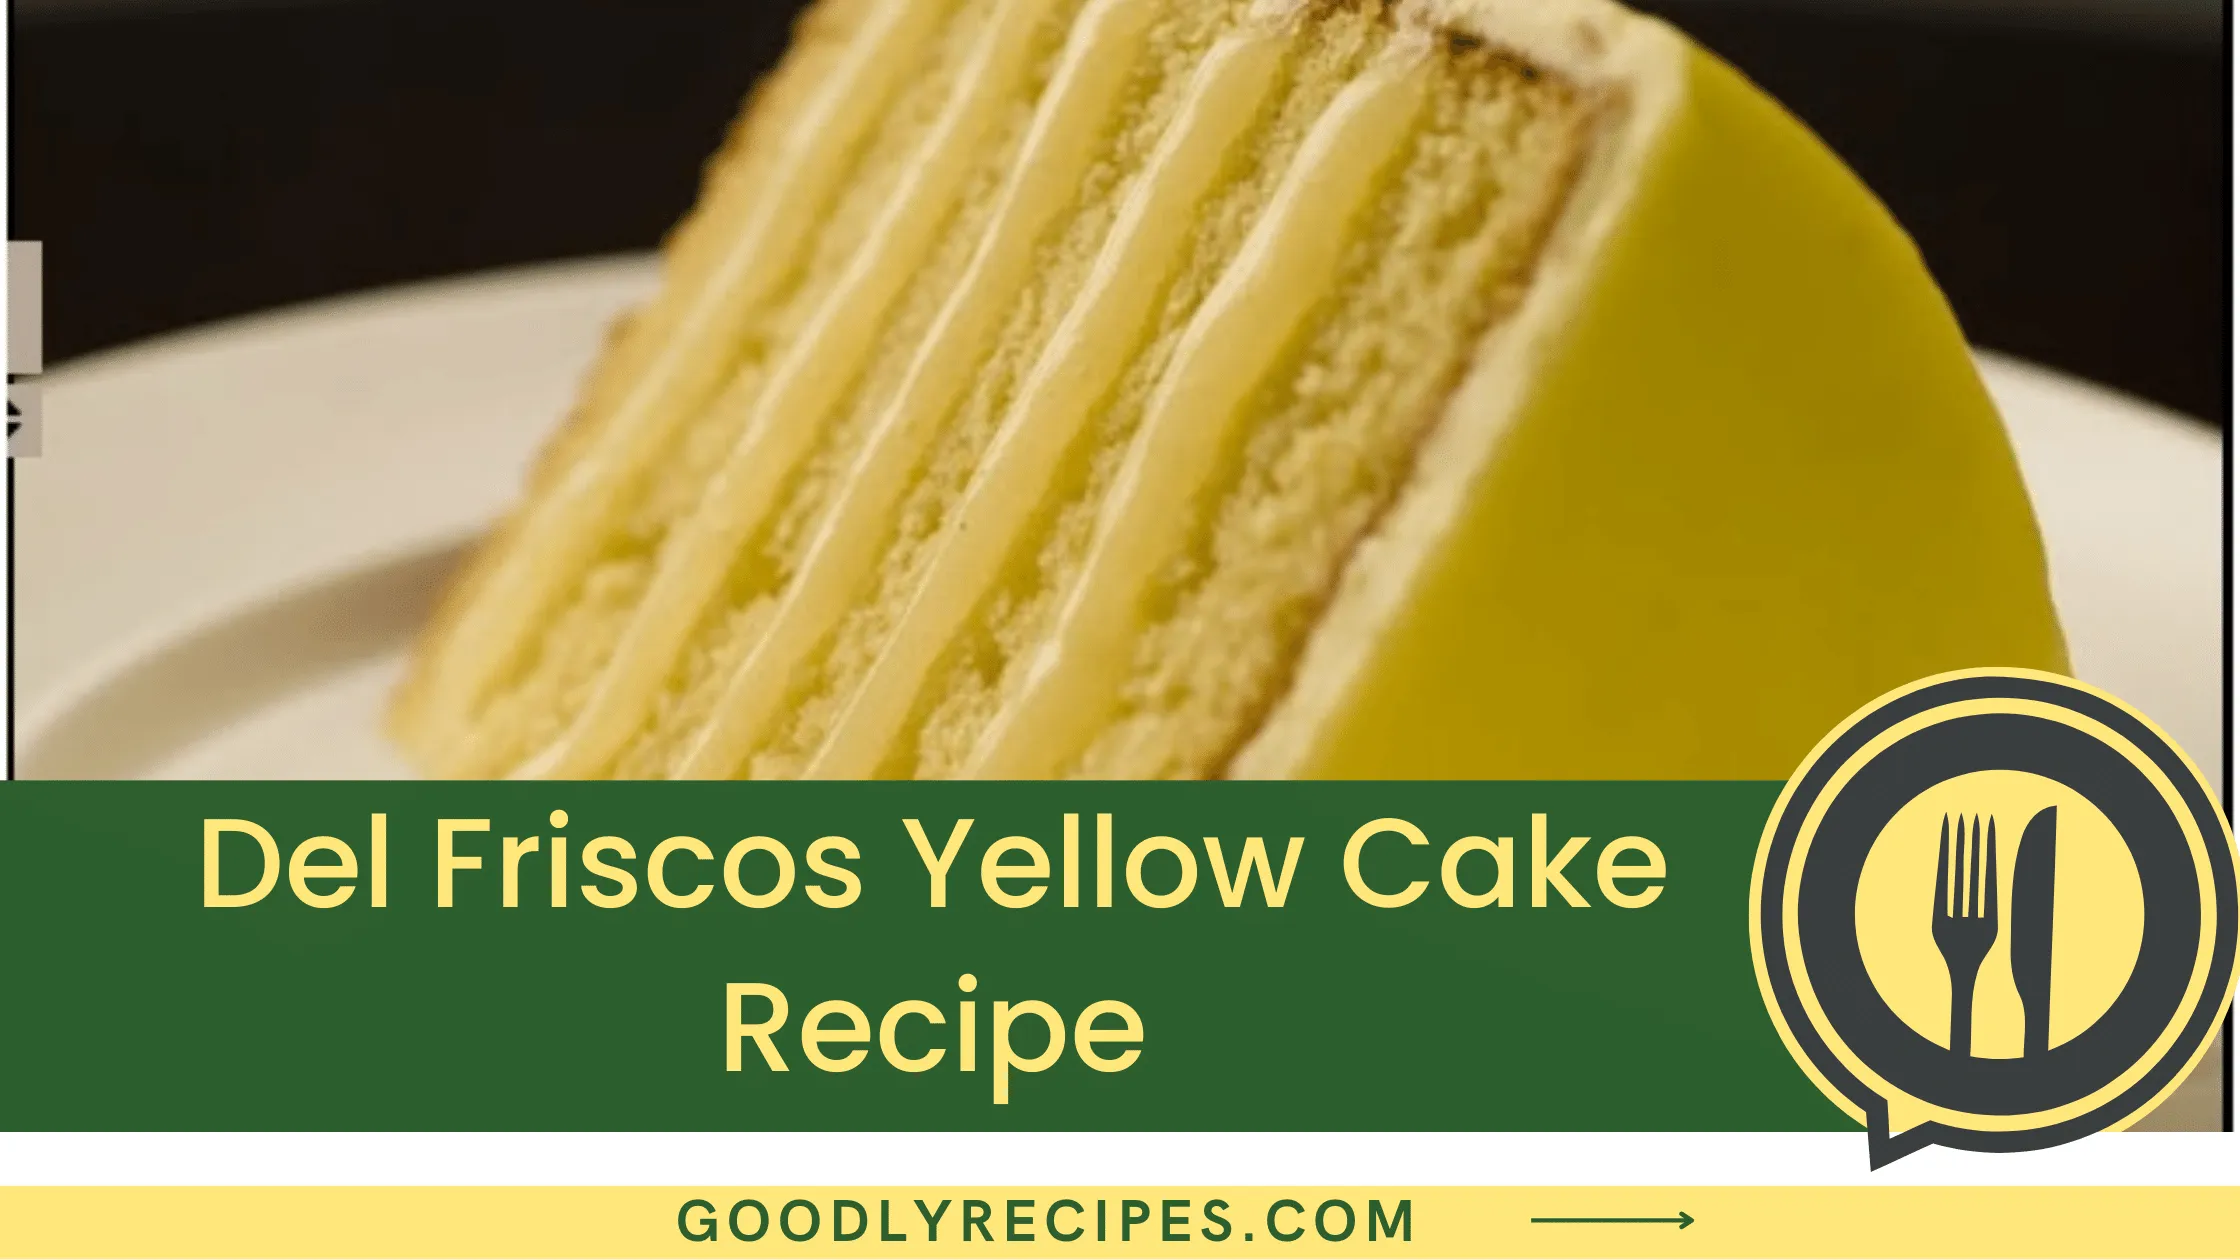 What Is Del Frisco's Yellow Cake?